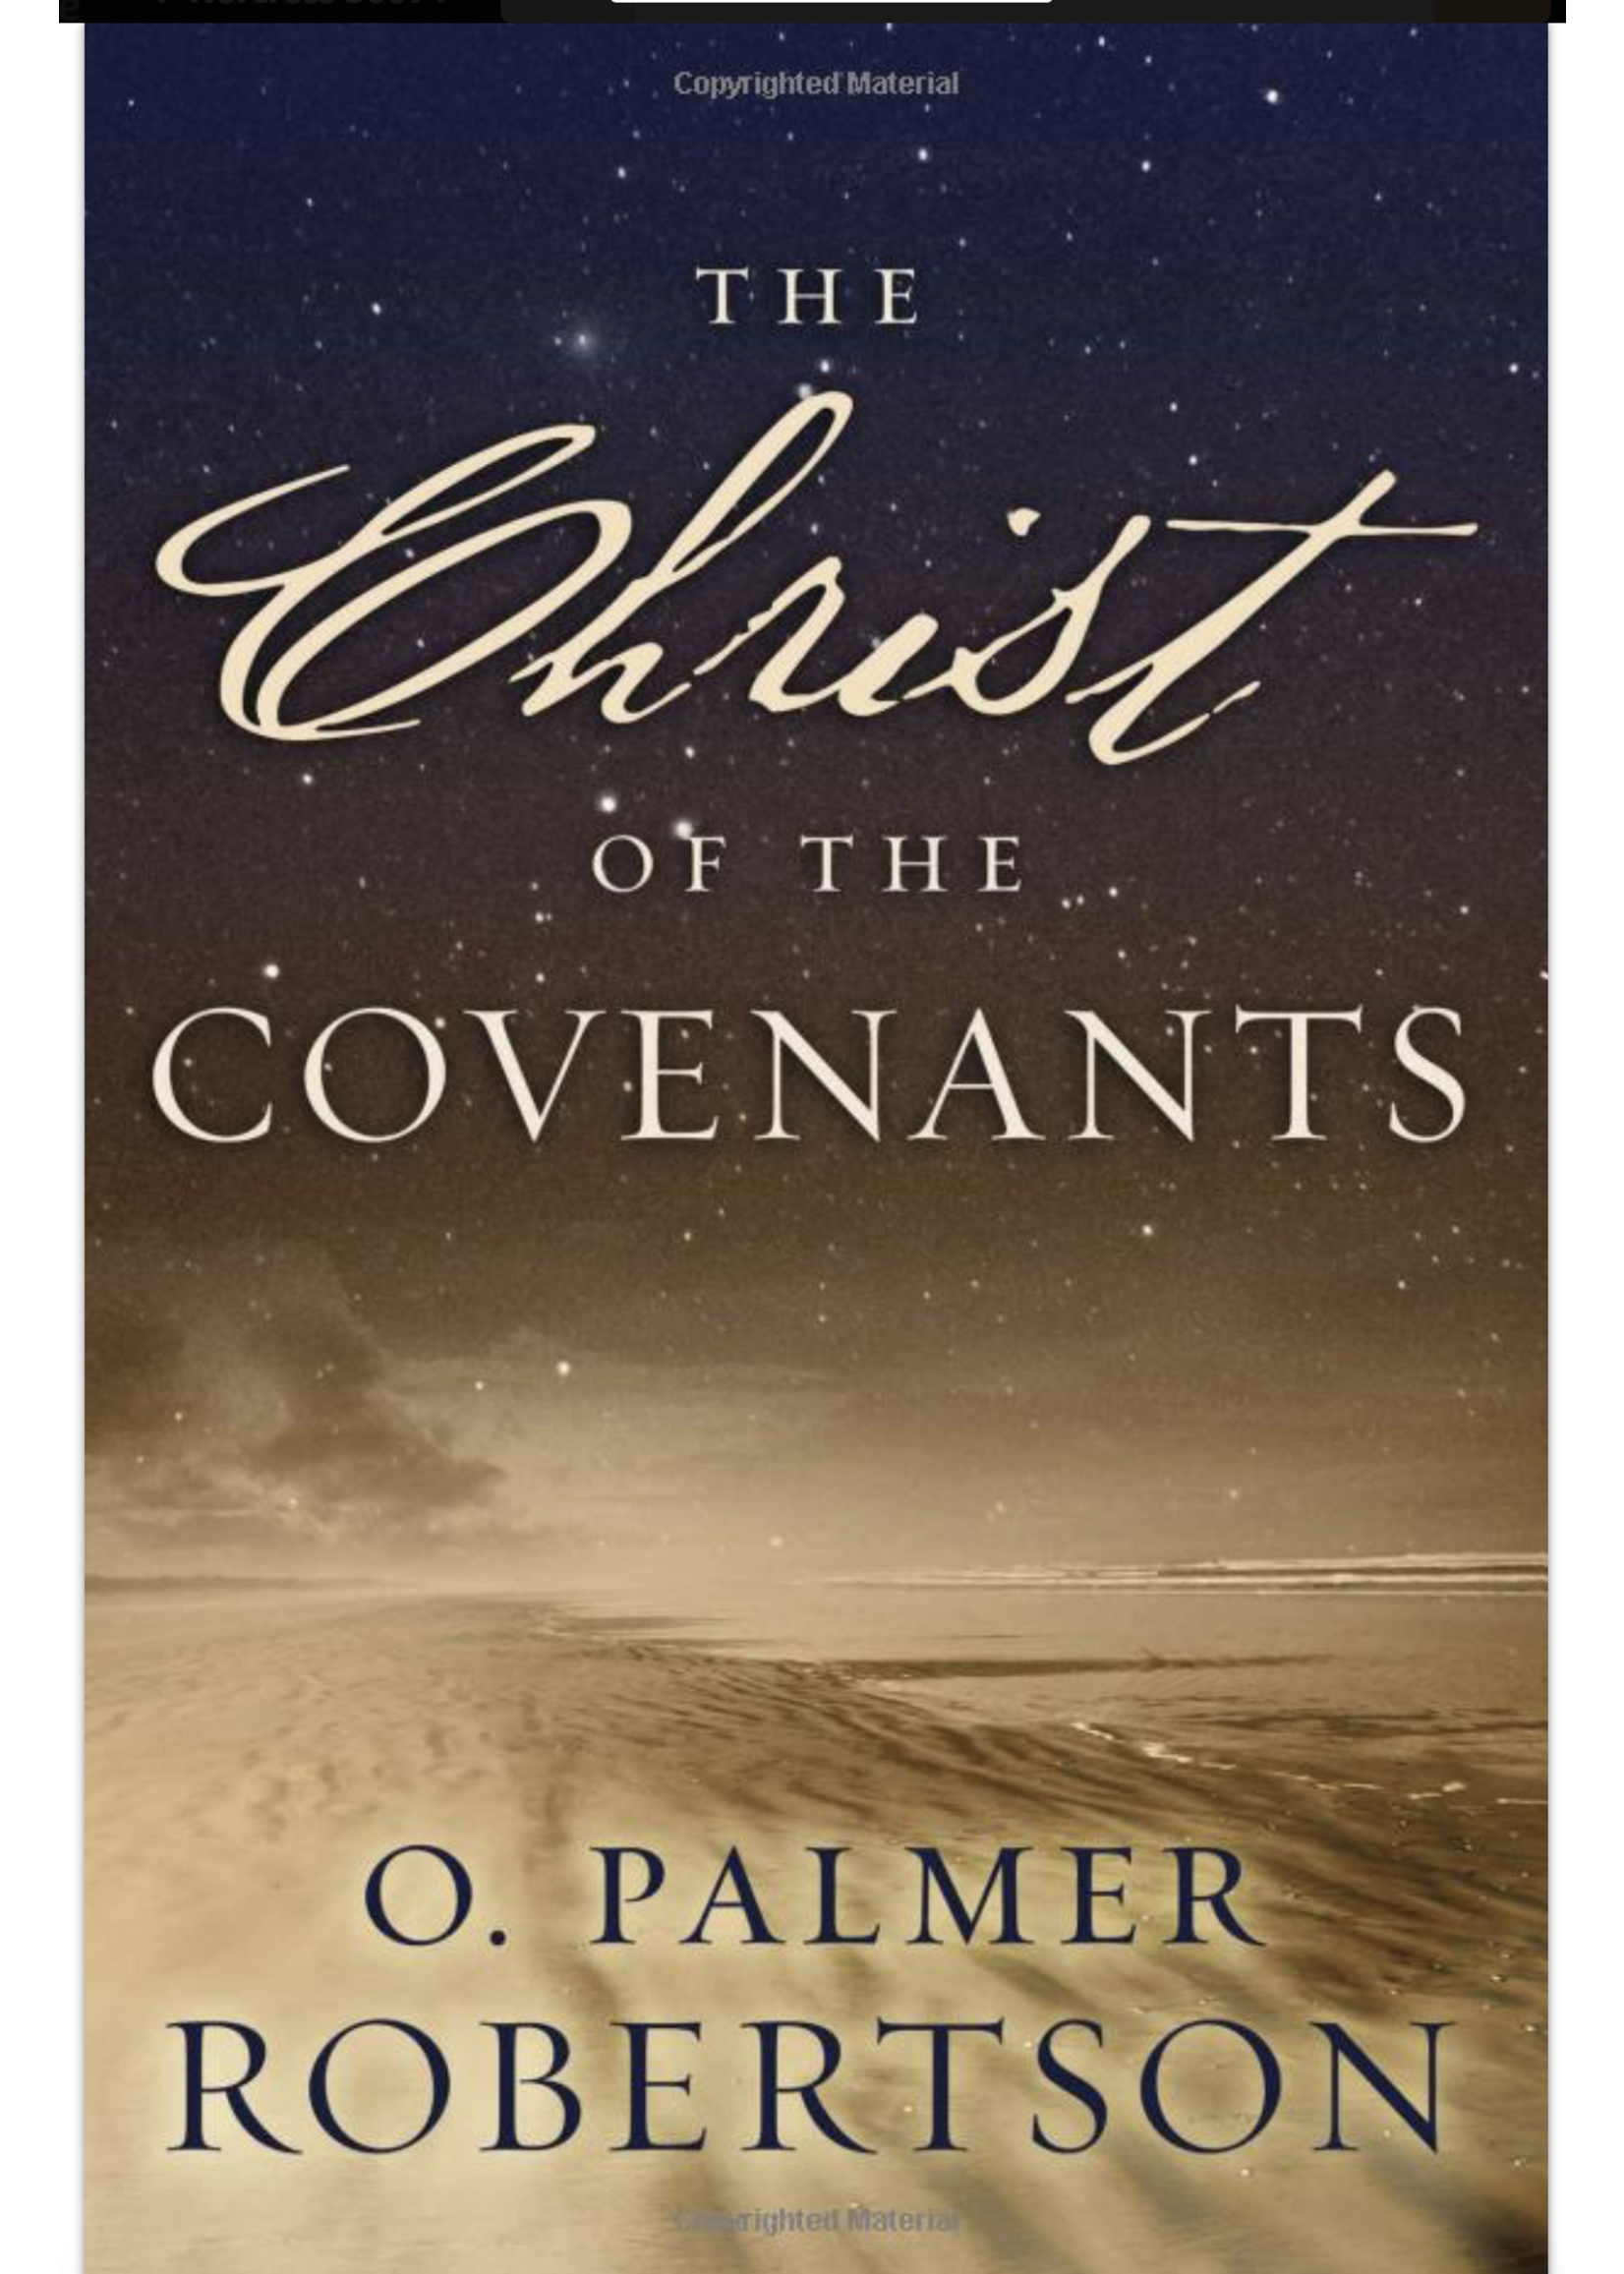 The Christ of the Covenants [O. Palmer Robertson]